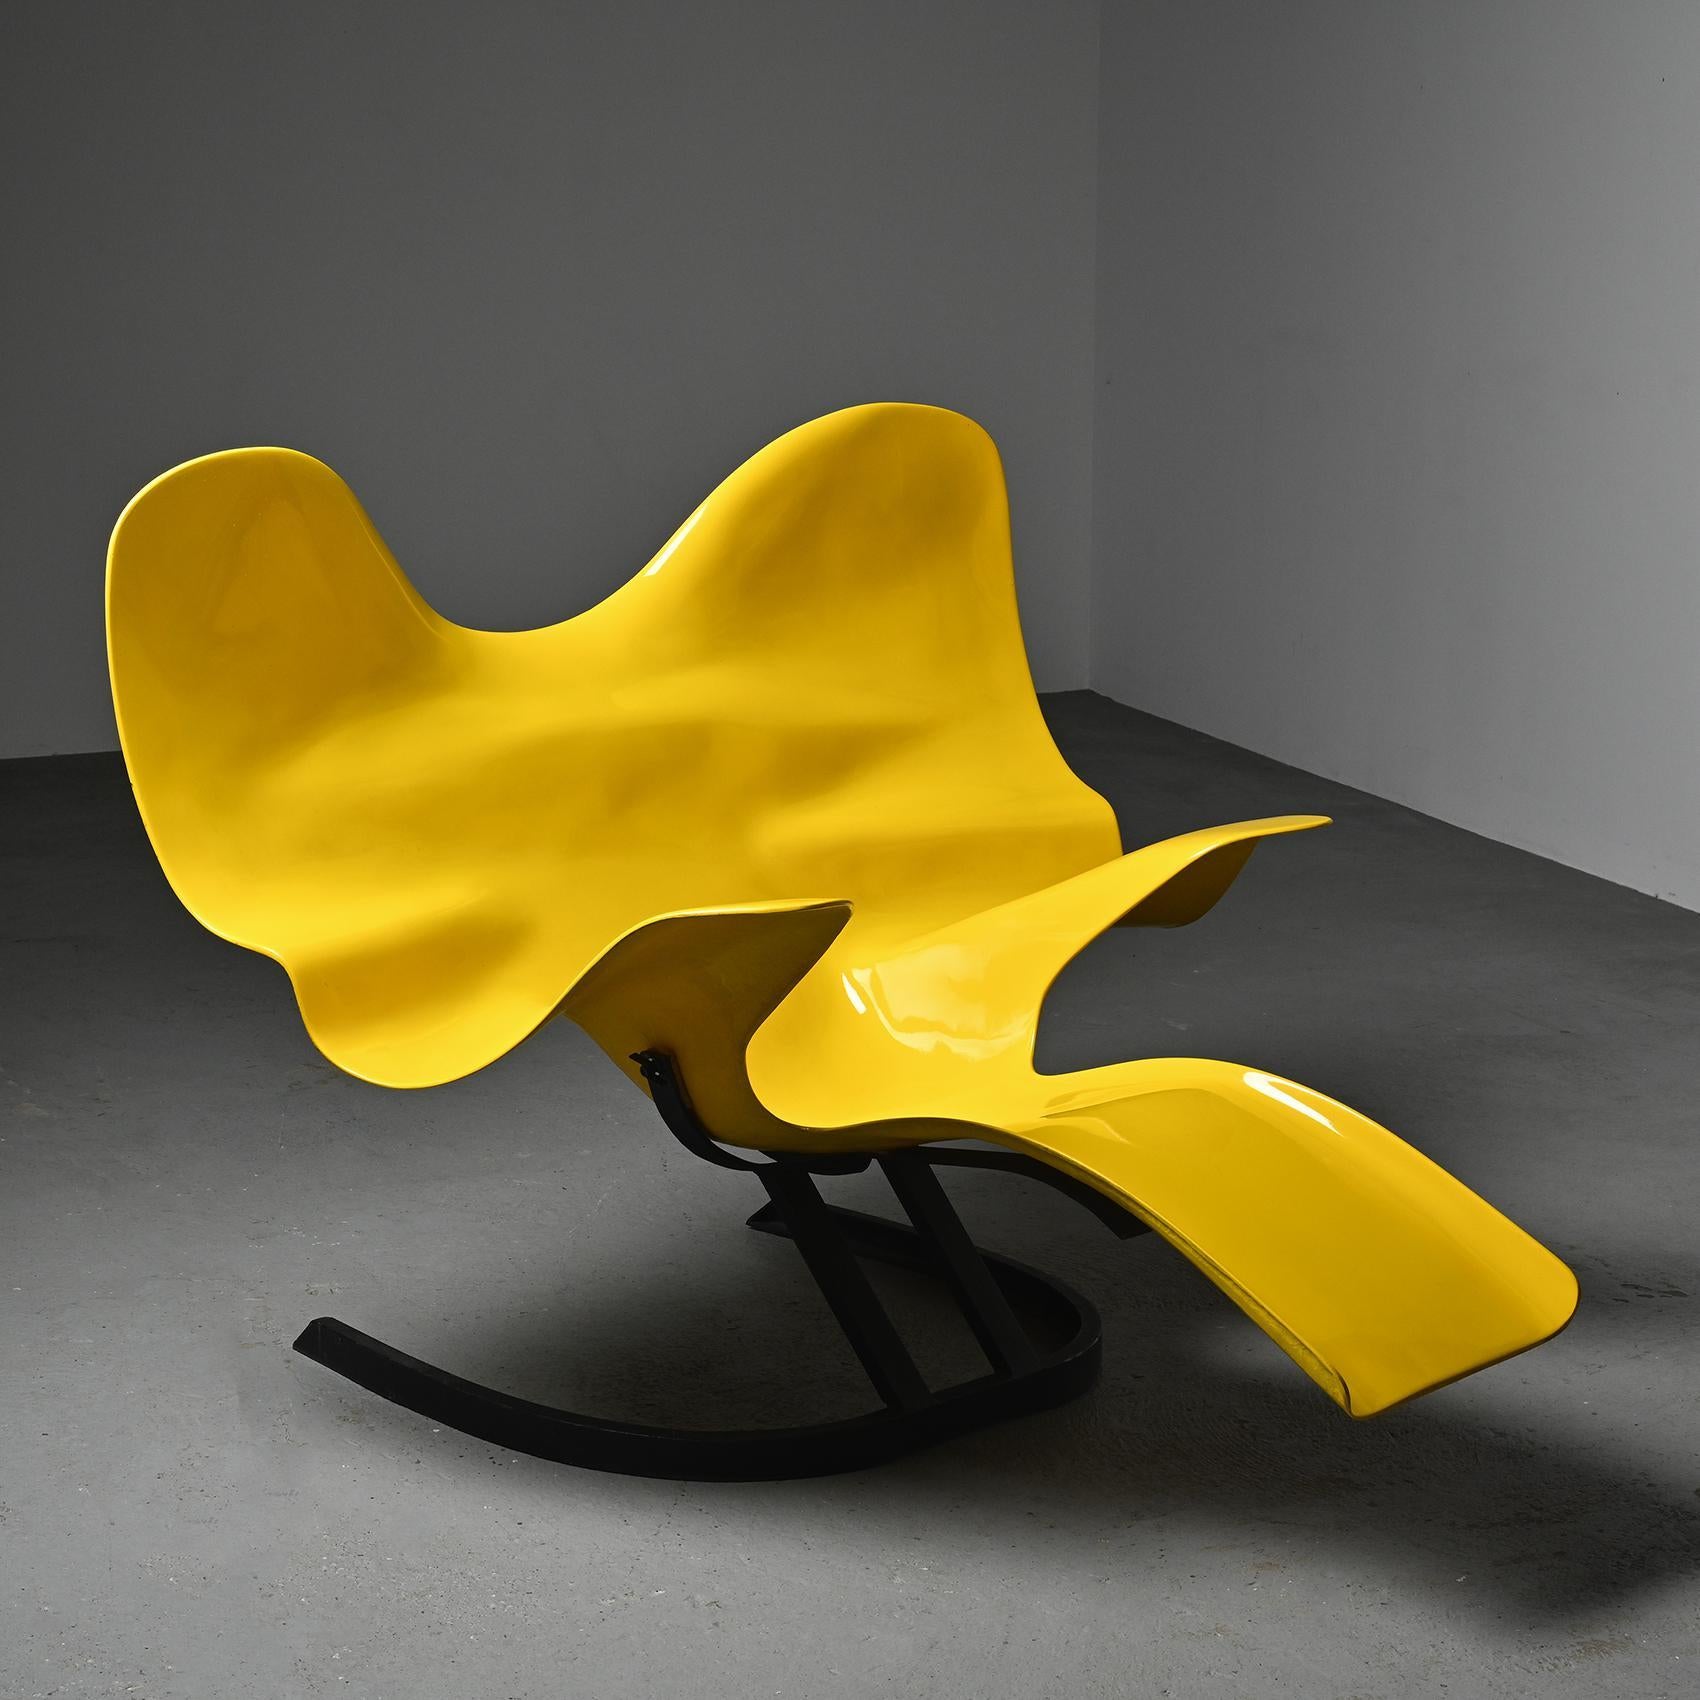 The Elephant armchair, conceived by the French artist Bernard Rancillac, embodies a captivating fusion of contemporary art and functional design. Inspired by the pop-art aesthetic of the 1960s, its bold lines and elegant silhouette transcend the